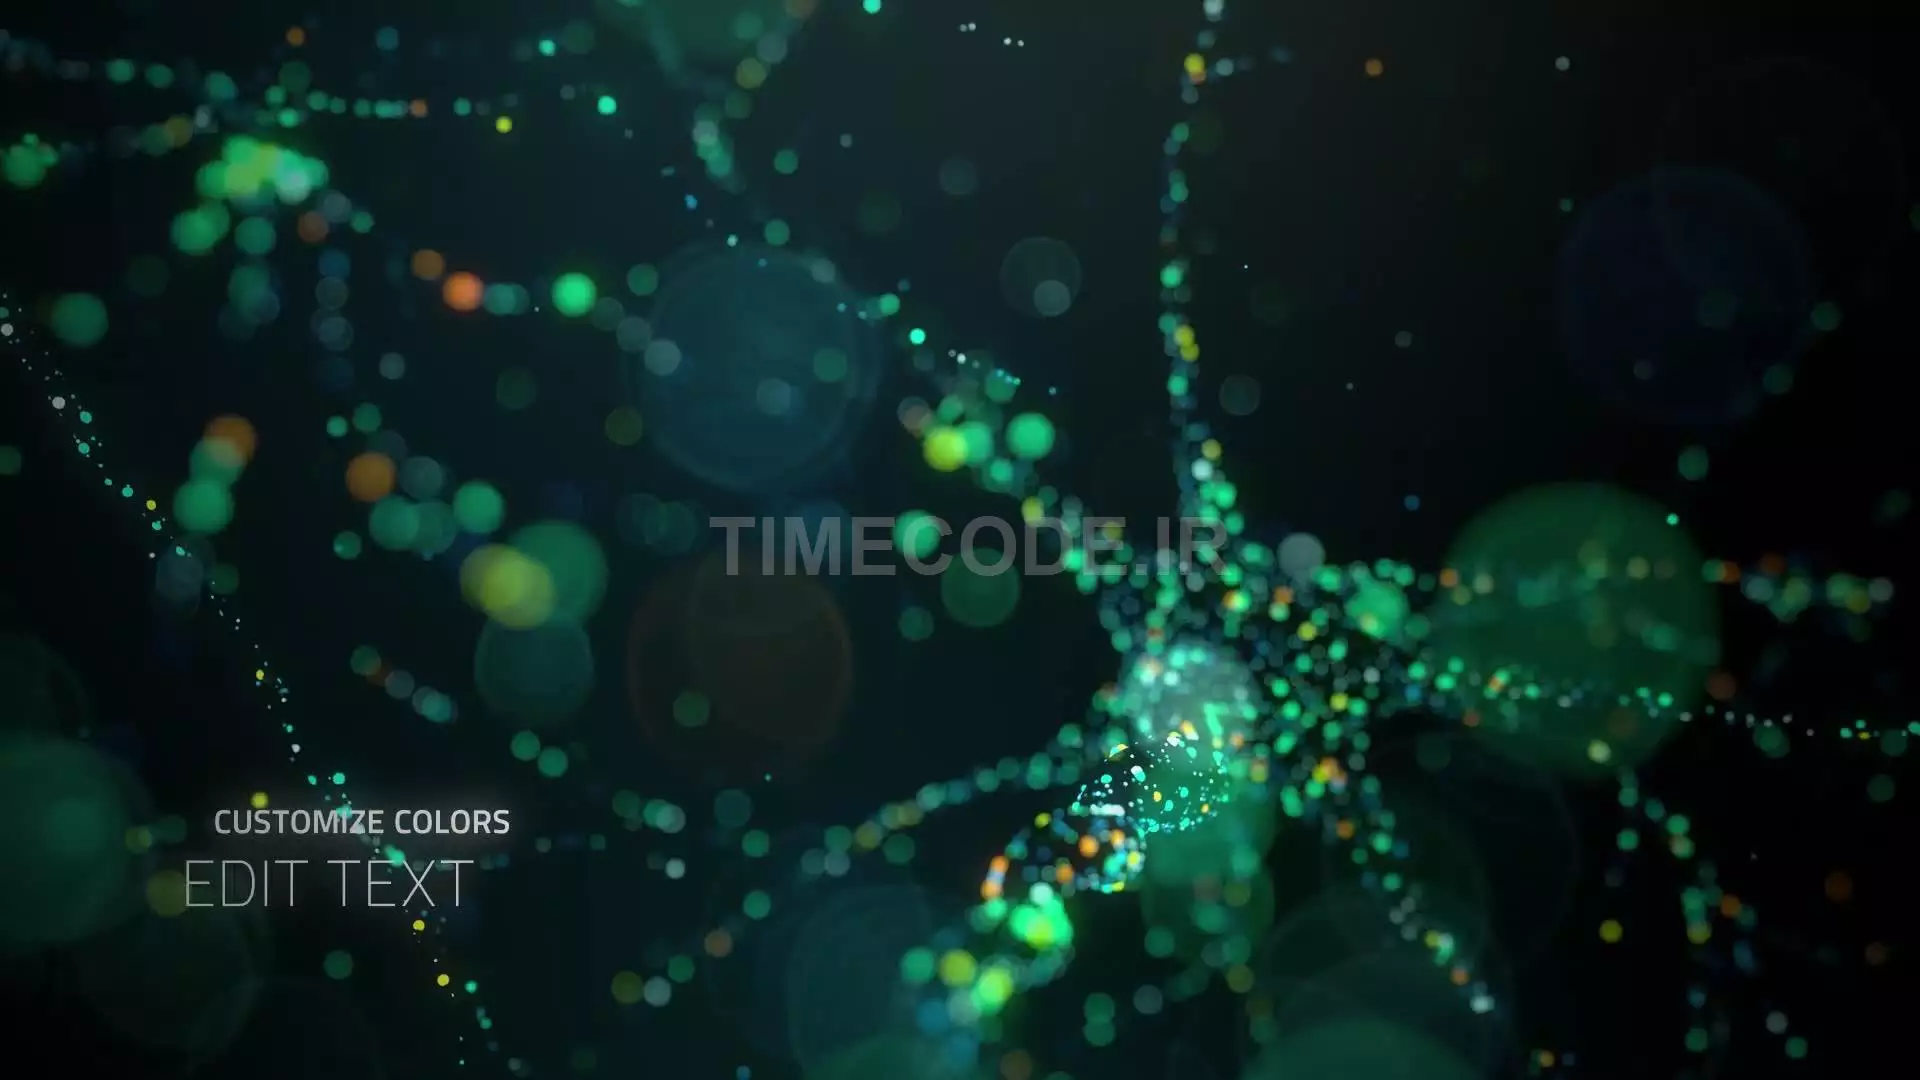 Neurons Title Sequence